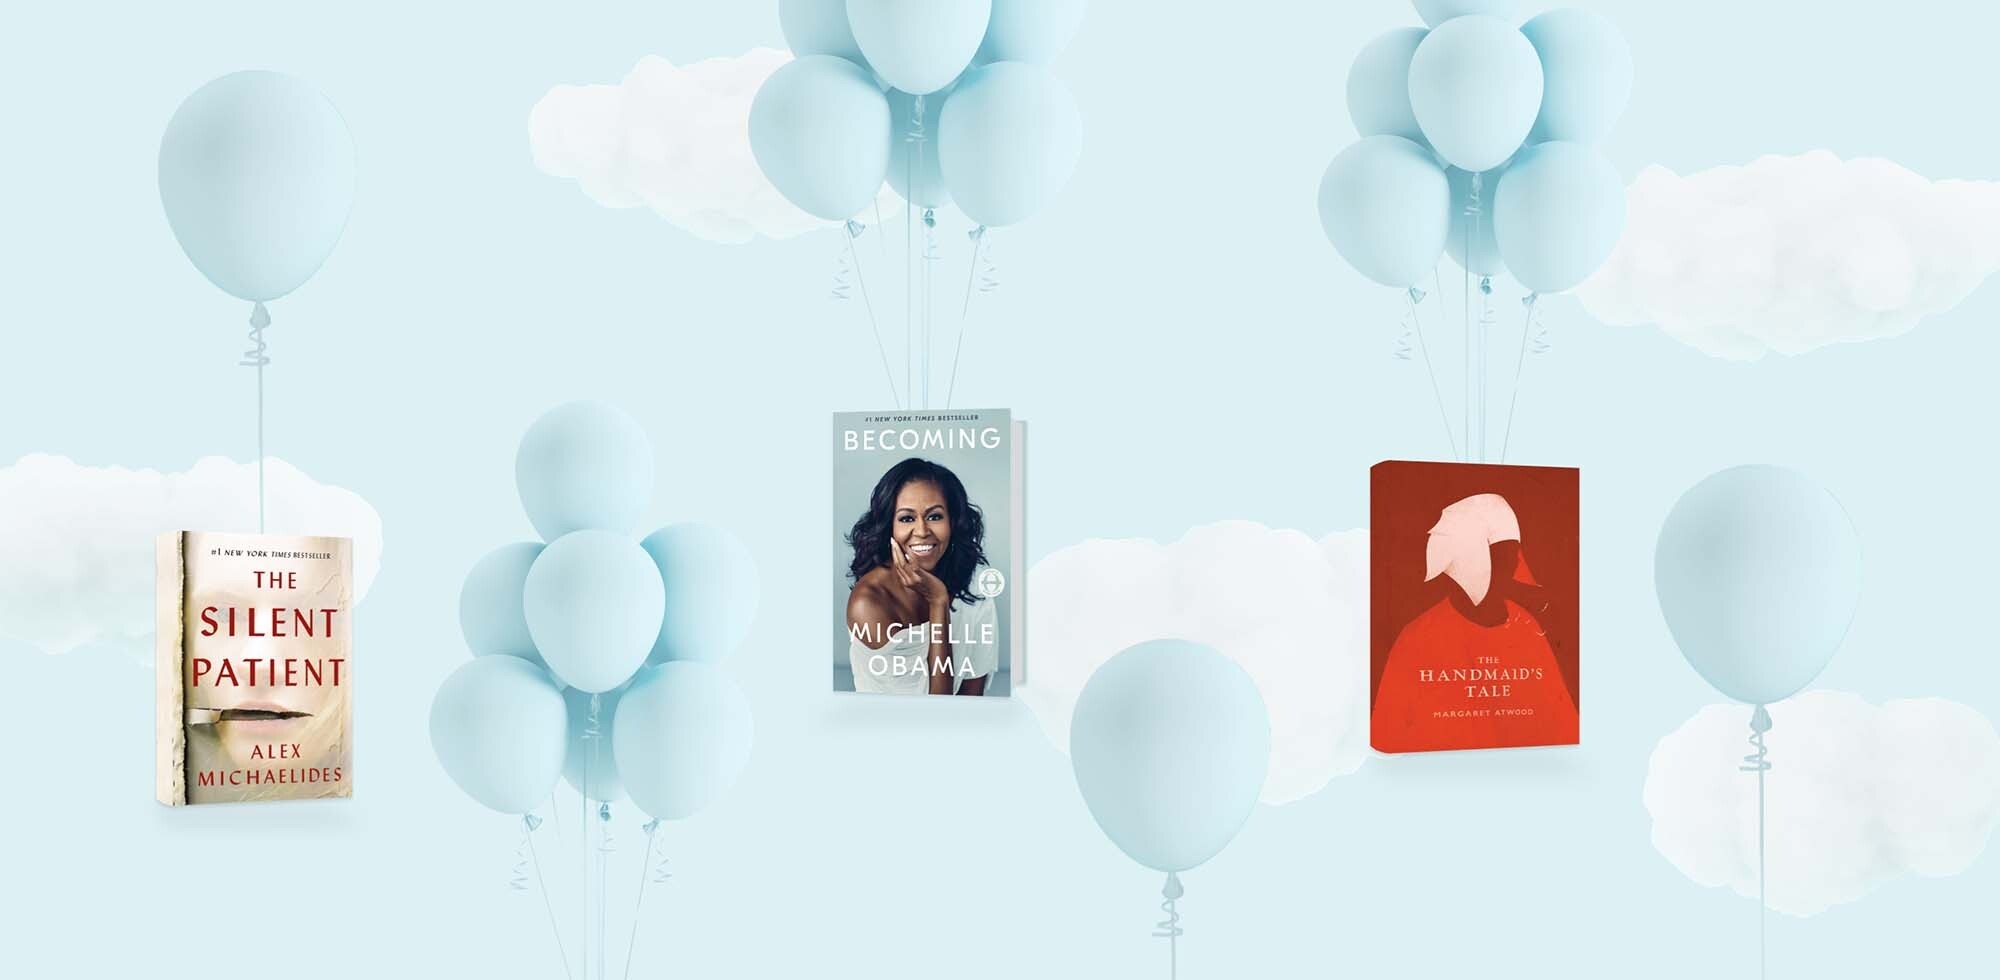 A designed image showing light blue balloons against a clouds-on-blue backdrop. Three books appear in the image - The Silent Patient, Becoming, and The Handmaid's Tale. 